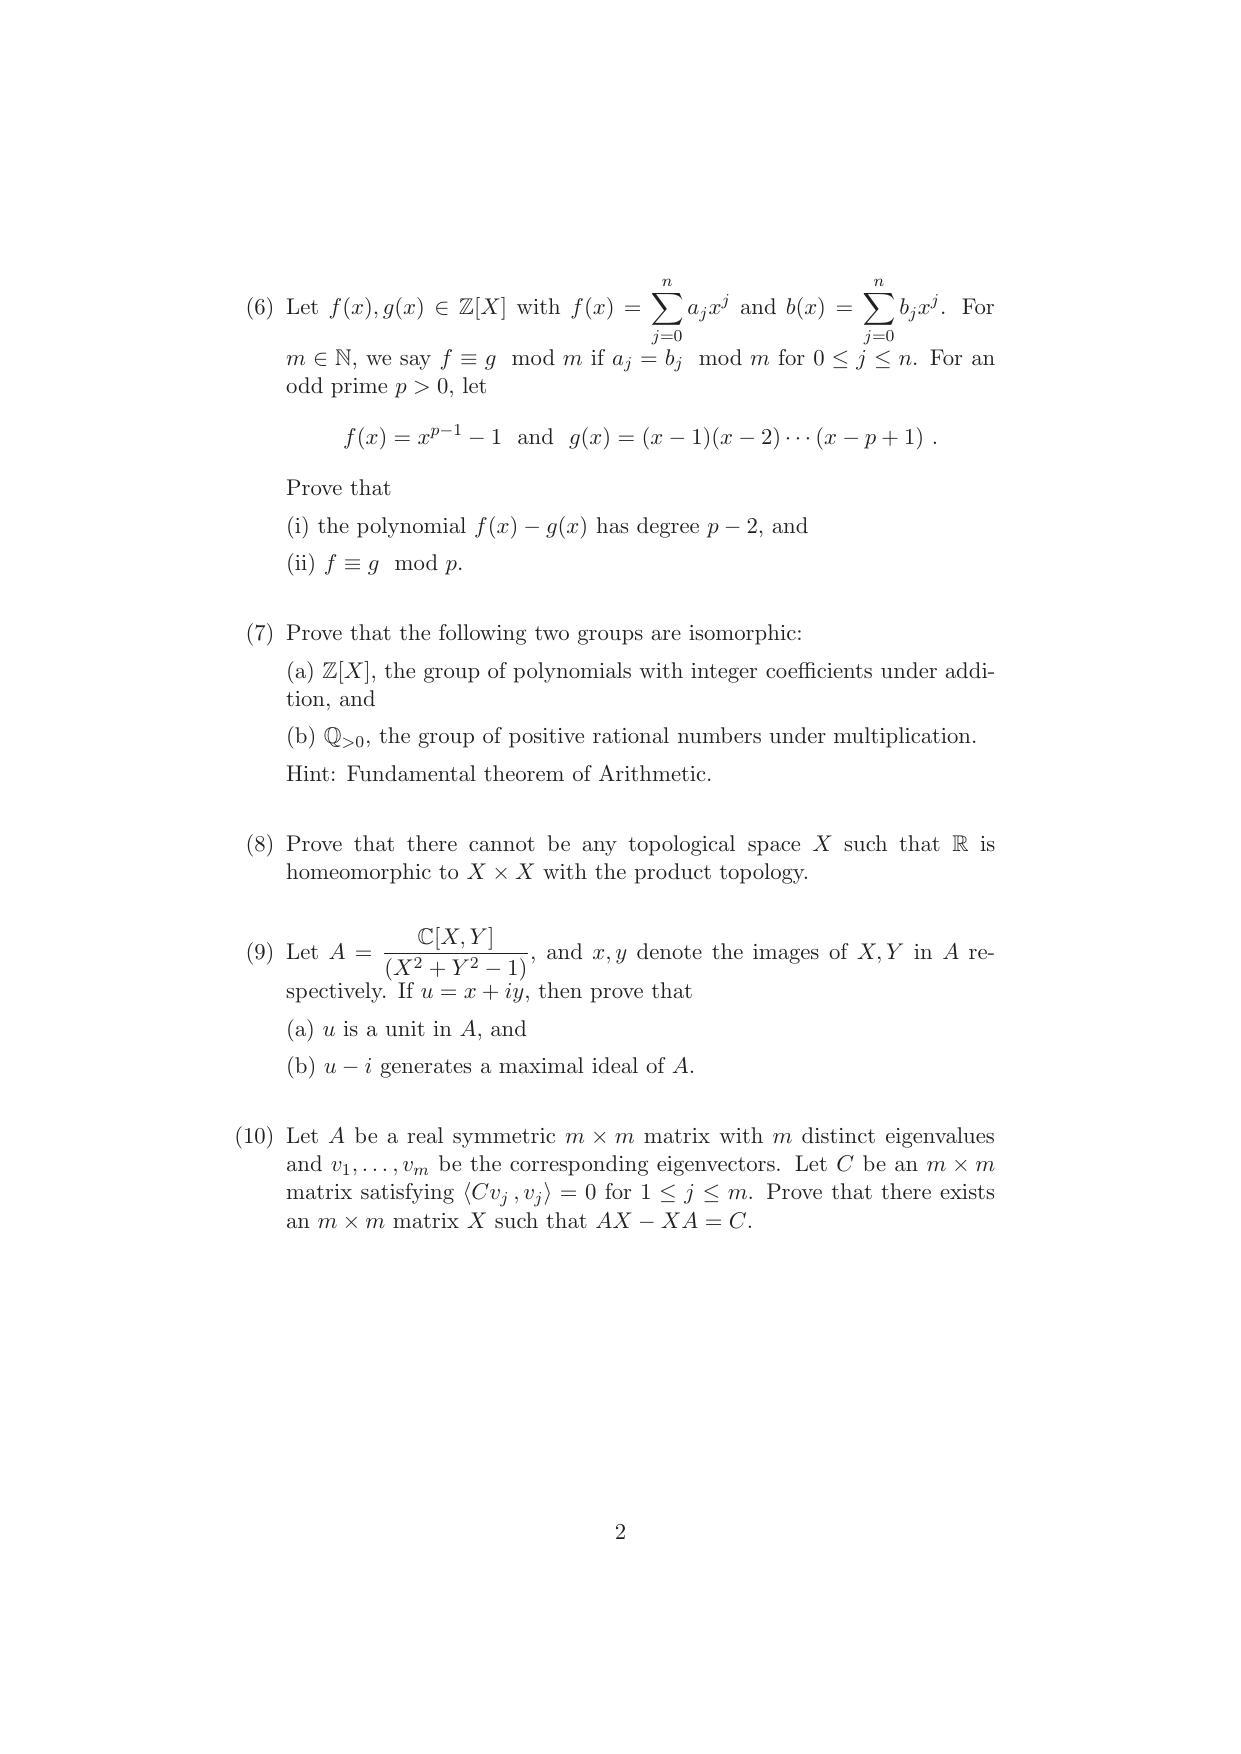 ISI Admission Test JRF in Mathematics MTB 2019 Sample Paper - Page 2